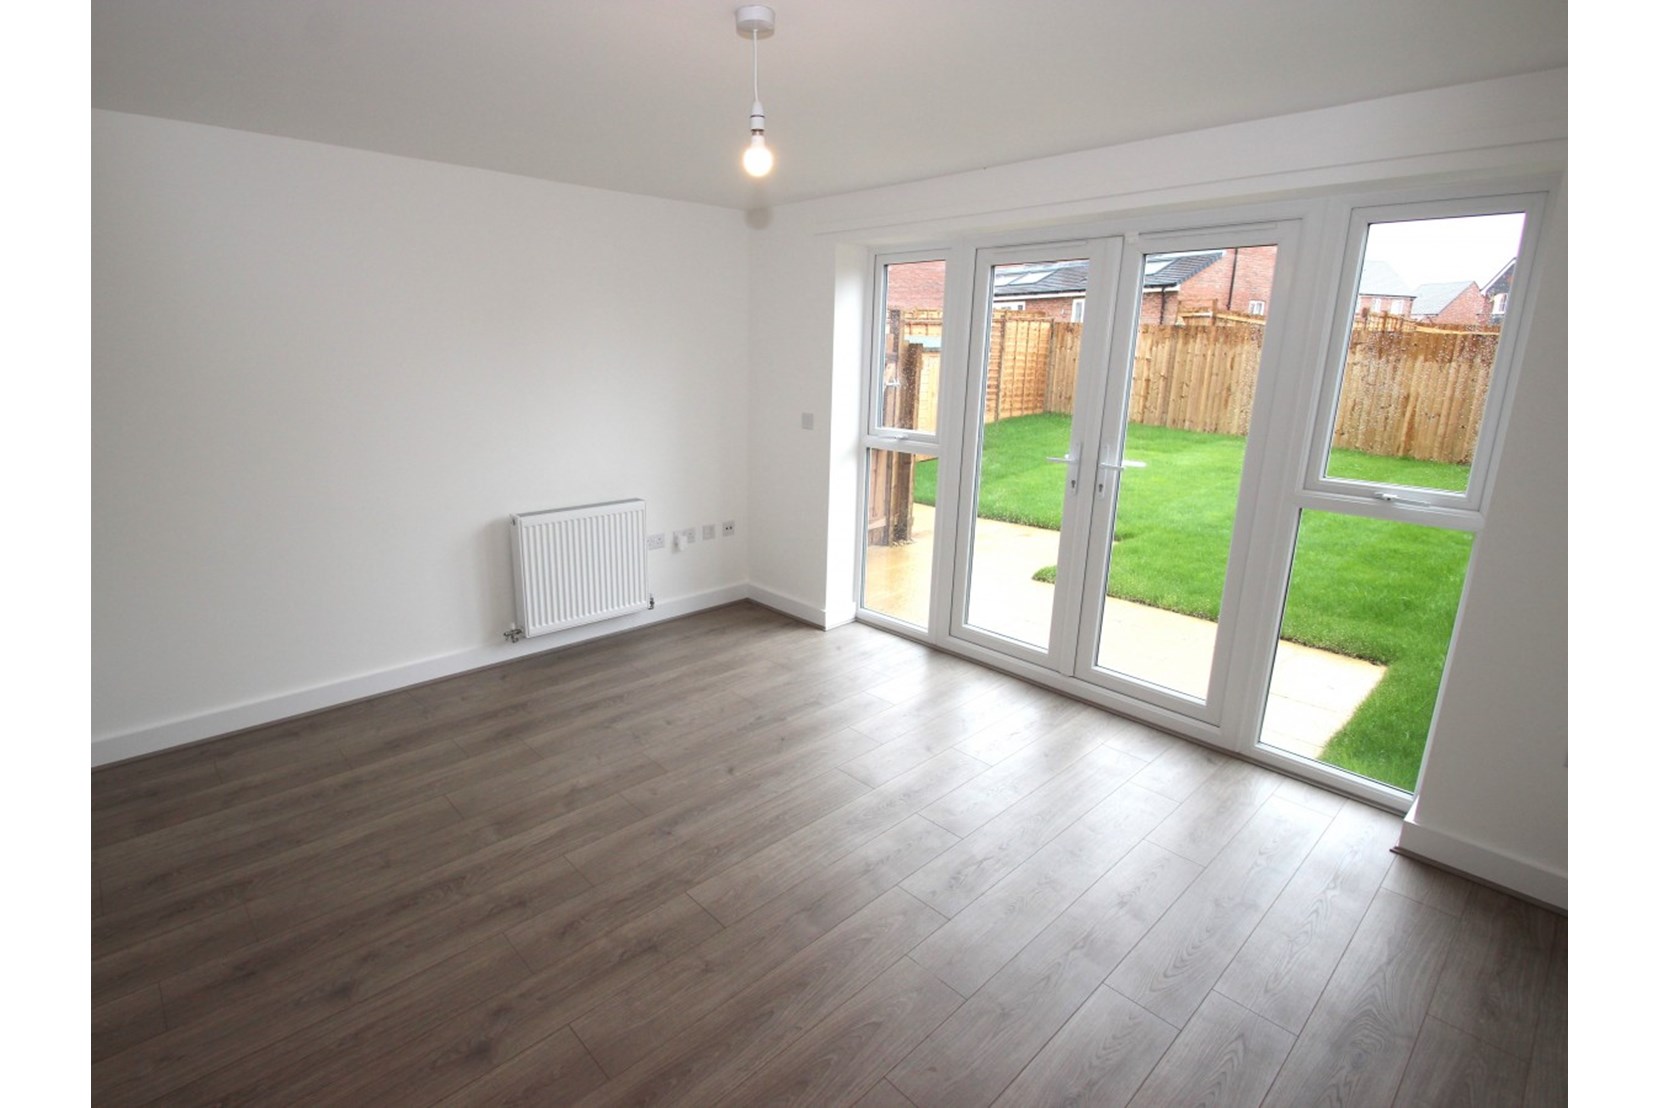 Homes to Rent by Allsop at The Pioneers, Houlton, Rugby, CV23, living area